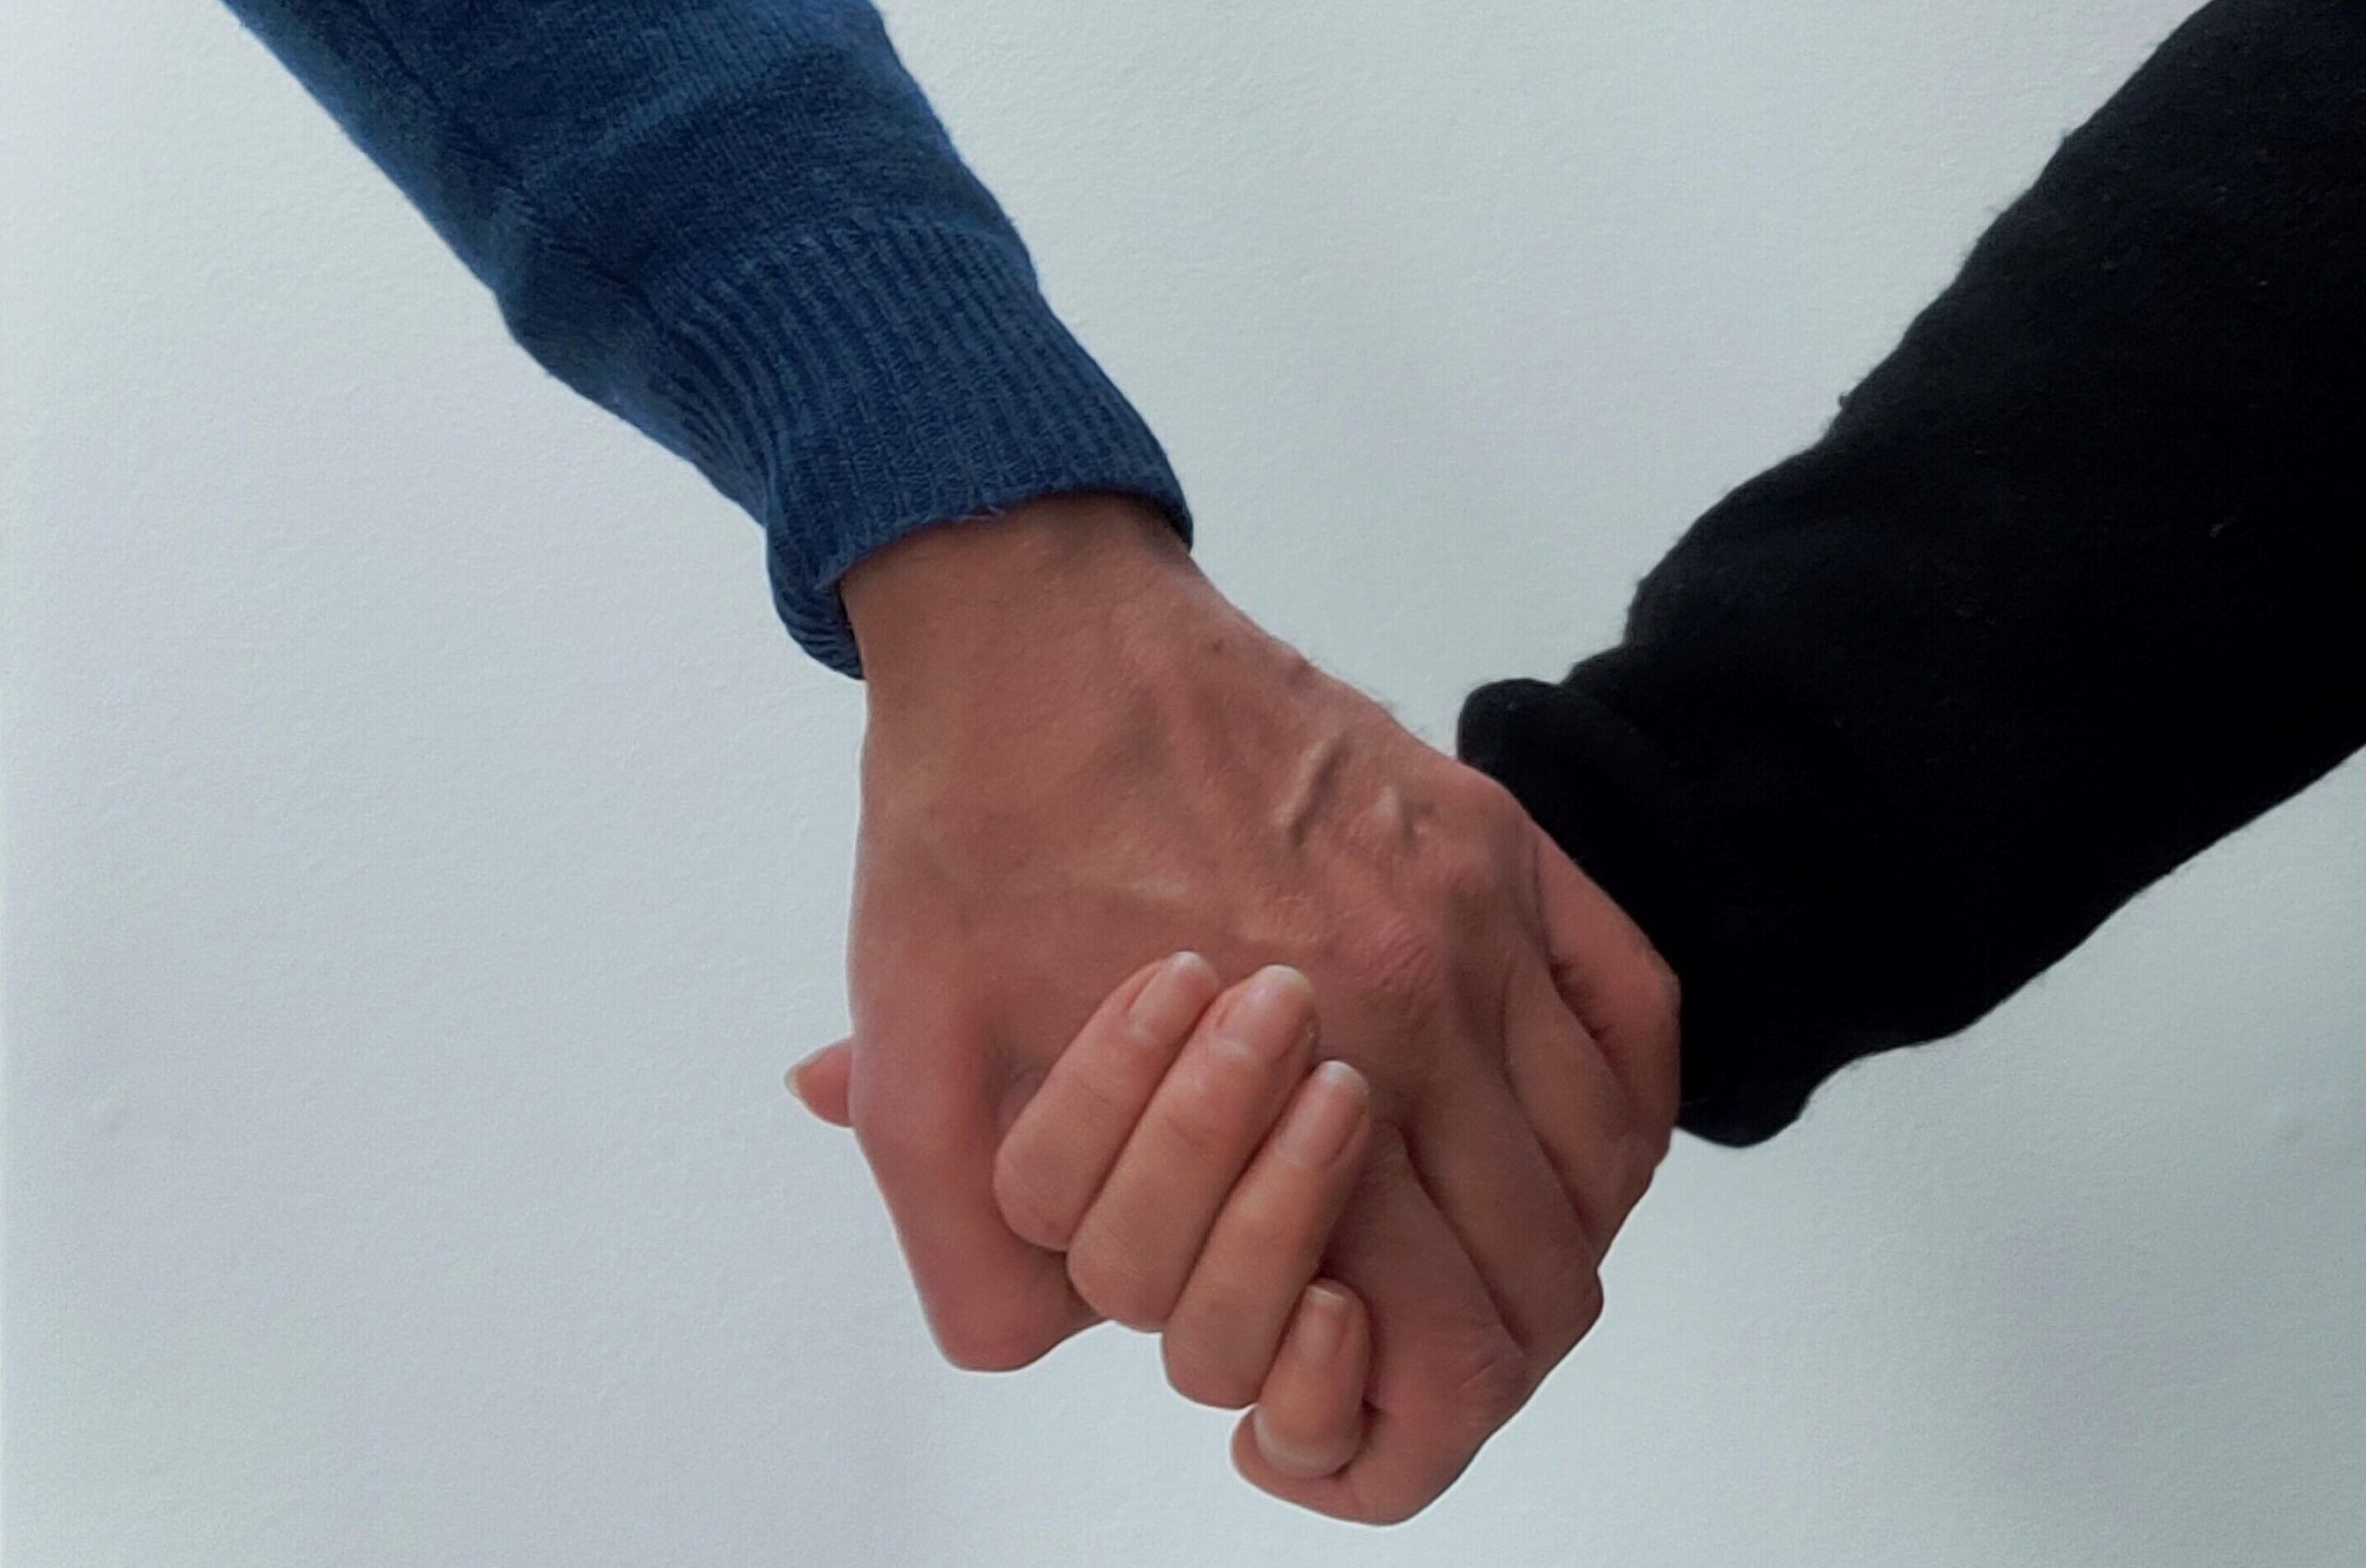 holding-hands-scaled-aspect-ratio-540-358